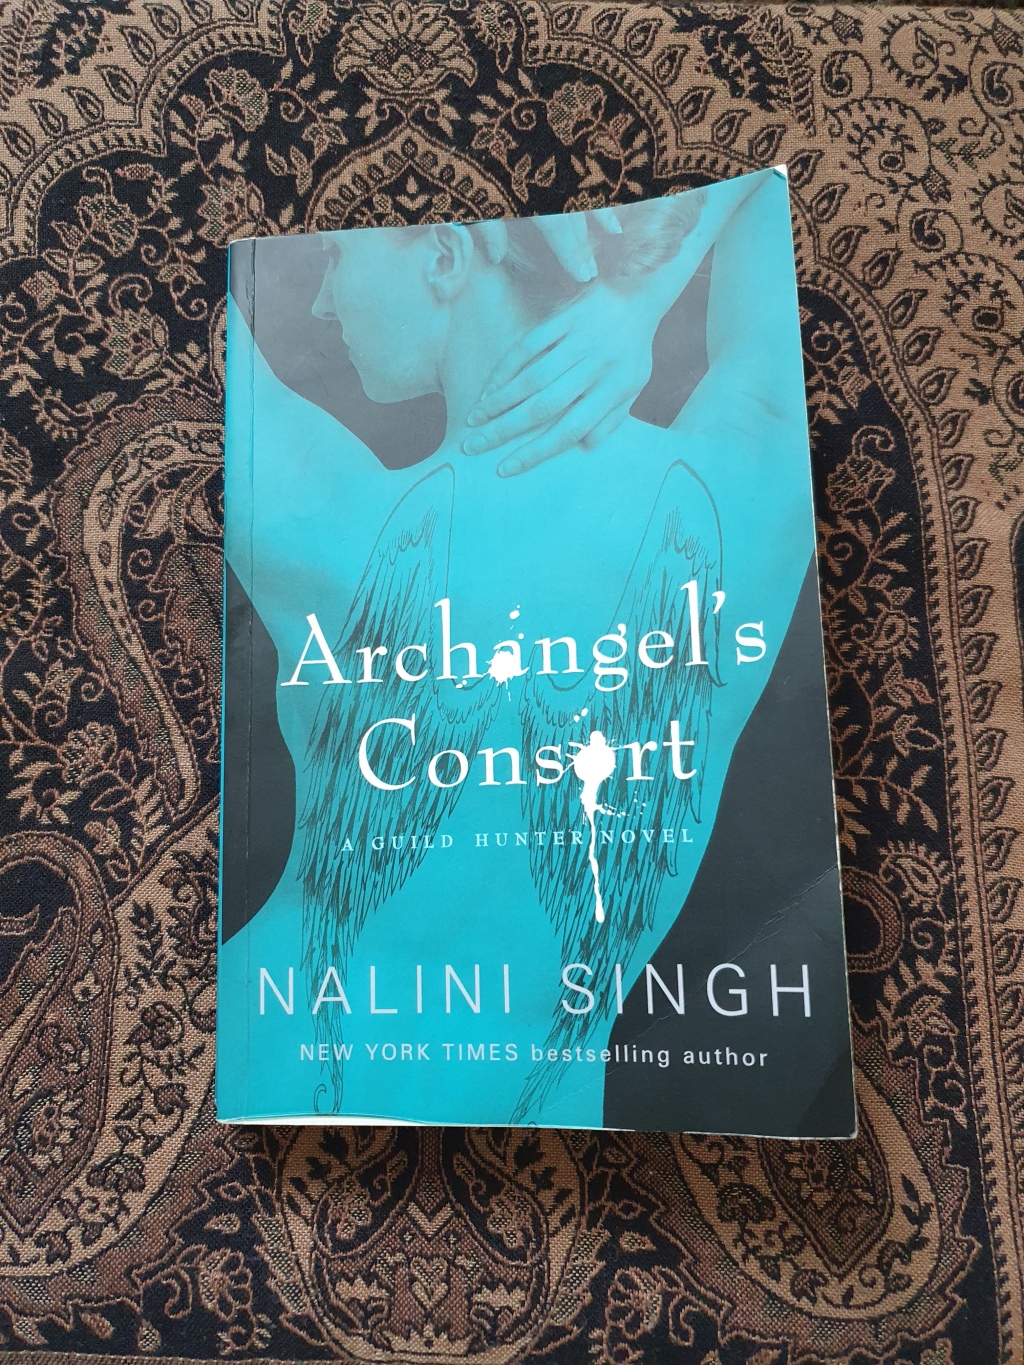 Book Review: ARCHANGEL’S CONSORT BY NALINI SINGH